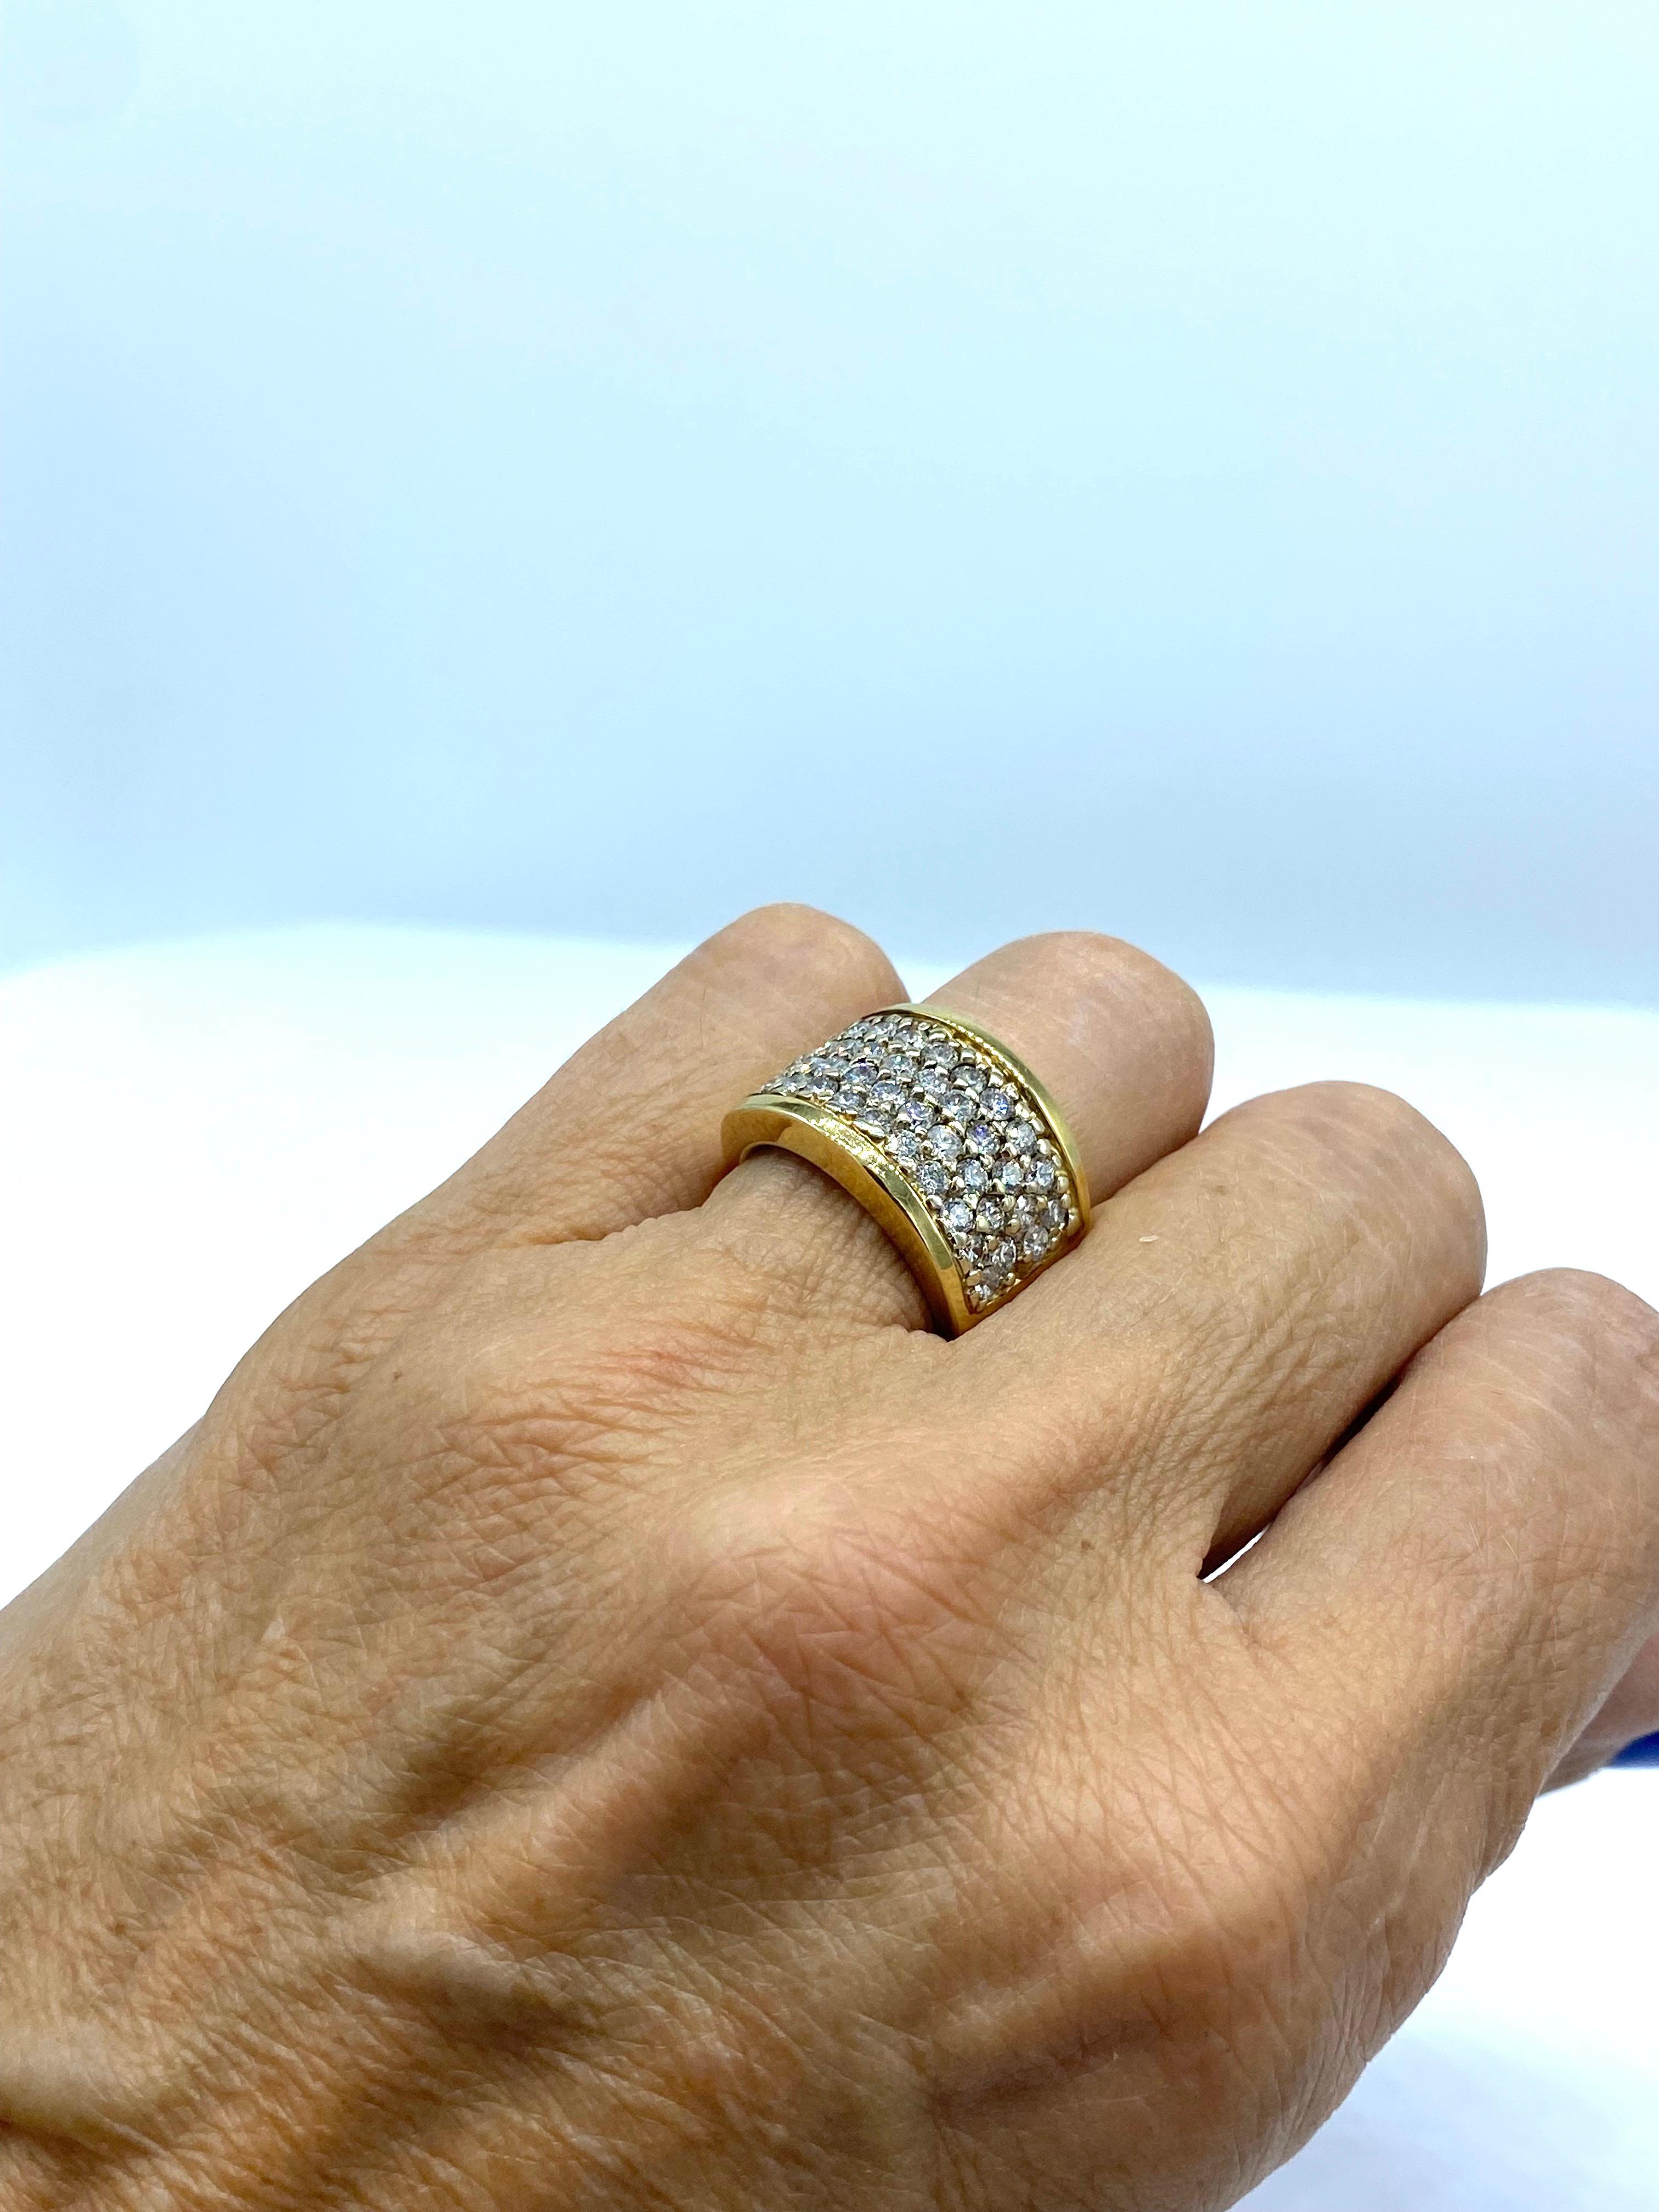 Contemporary Cigar Diamond Band consisting of 
42- round brilliant quality diamonds which are pave set in this heavy, durable ring. Diamonds measure 2.4 mm, having a total weight of 2.10 carats. The setting is durable and well made, with sturdy